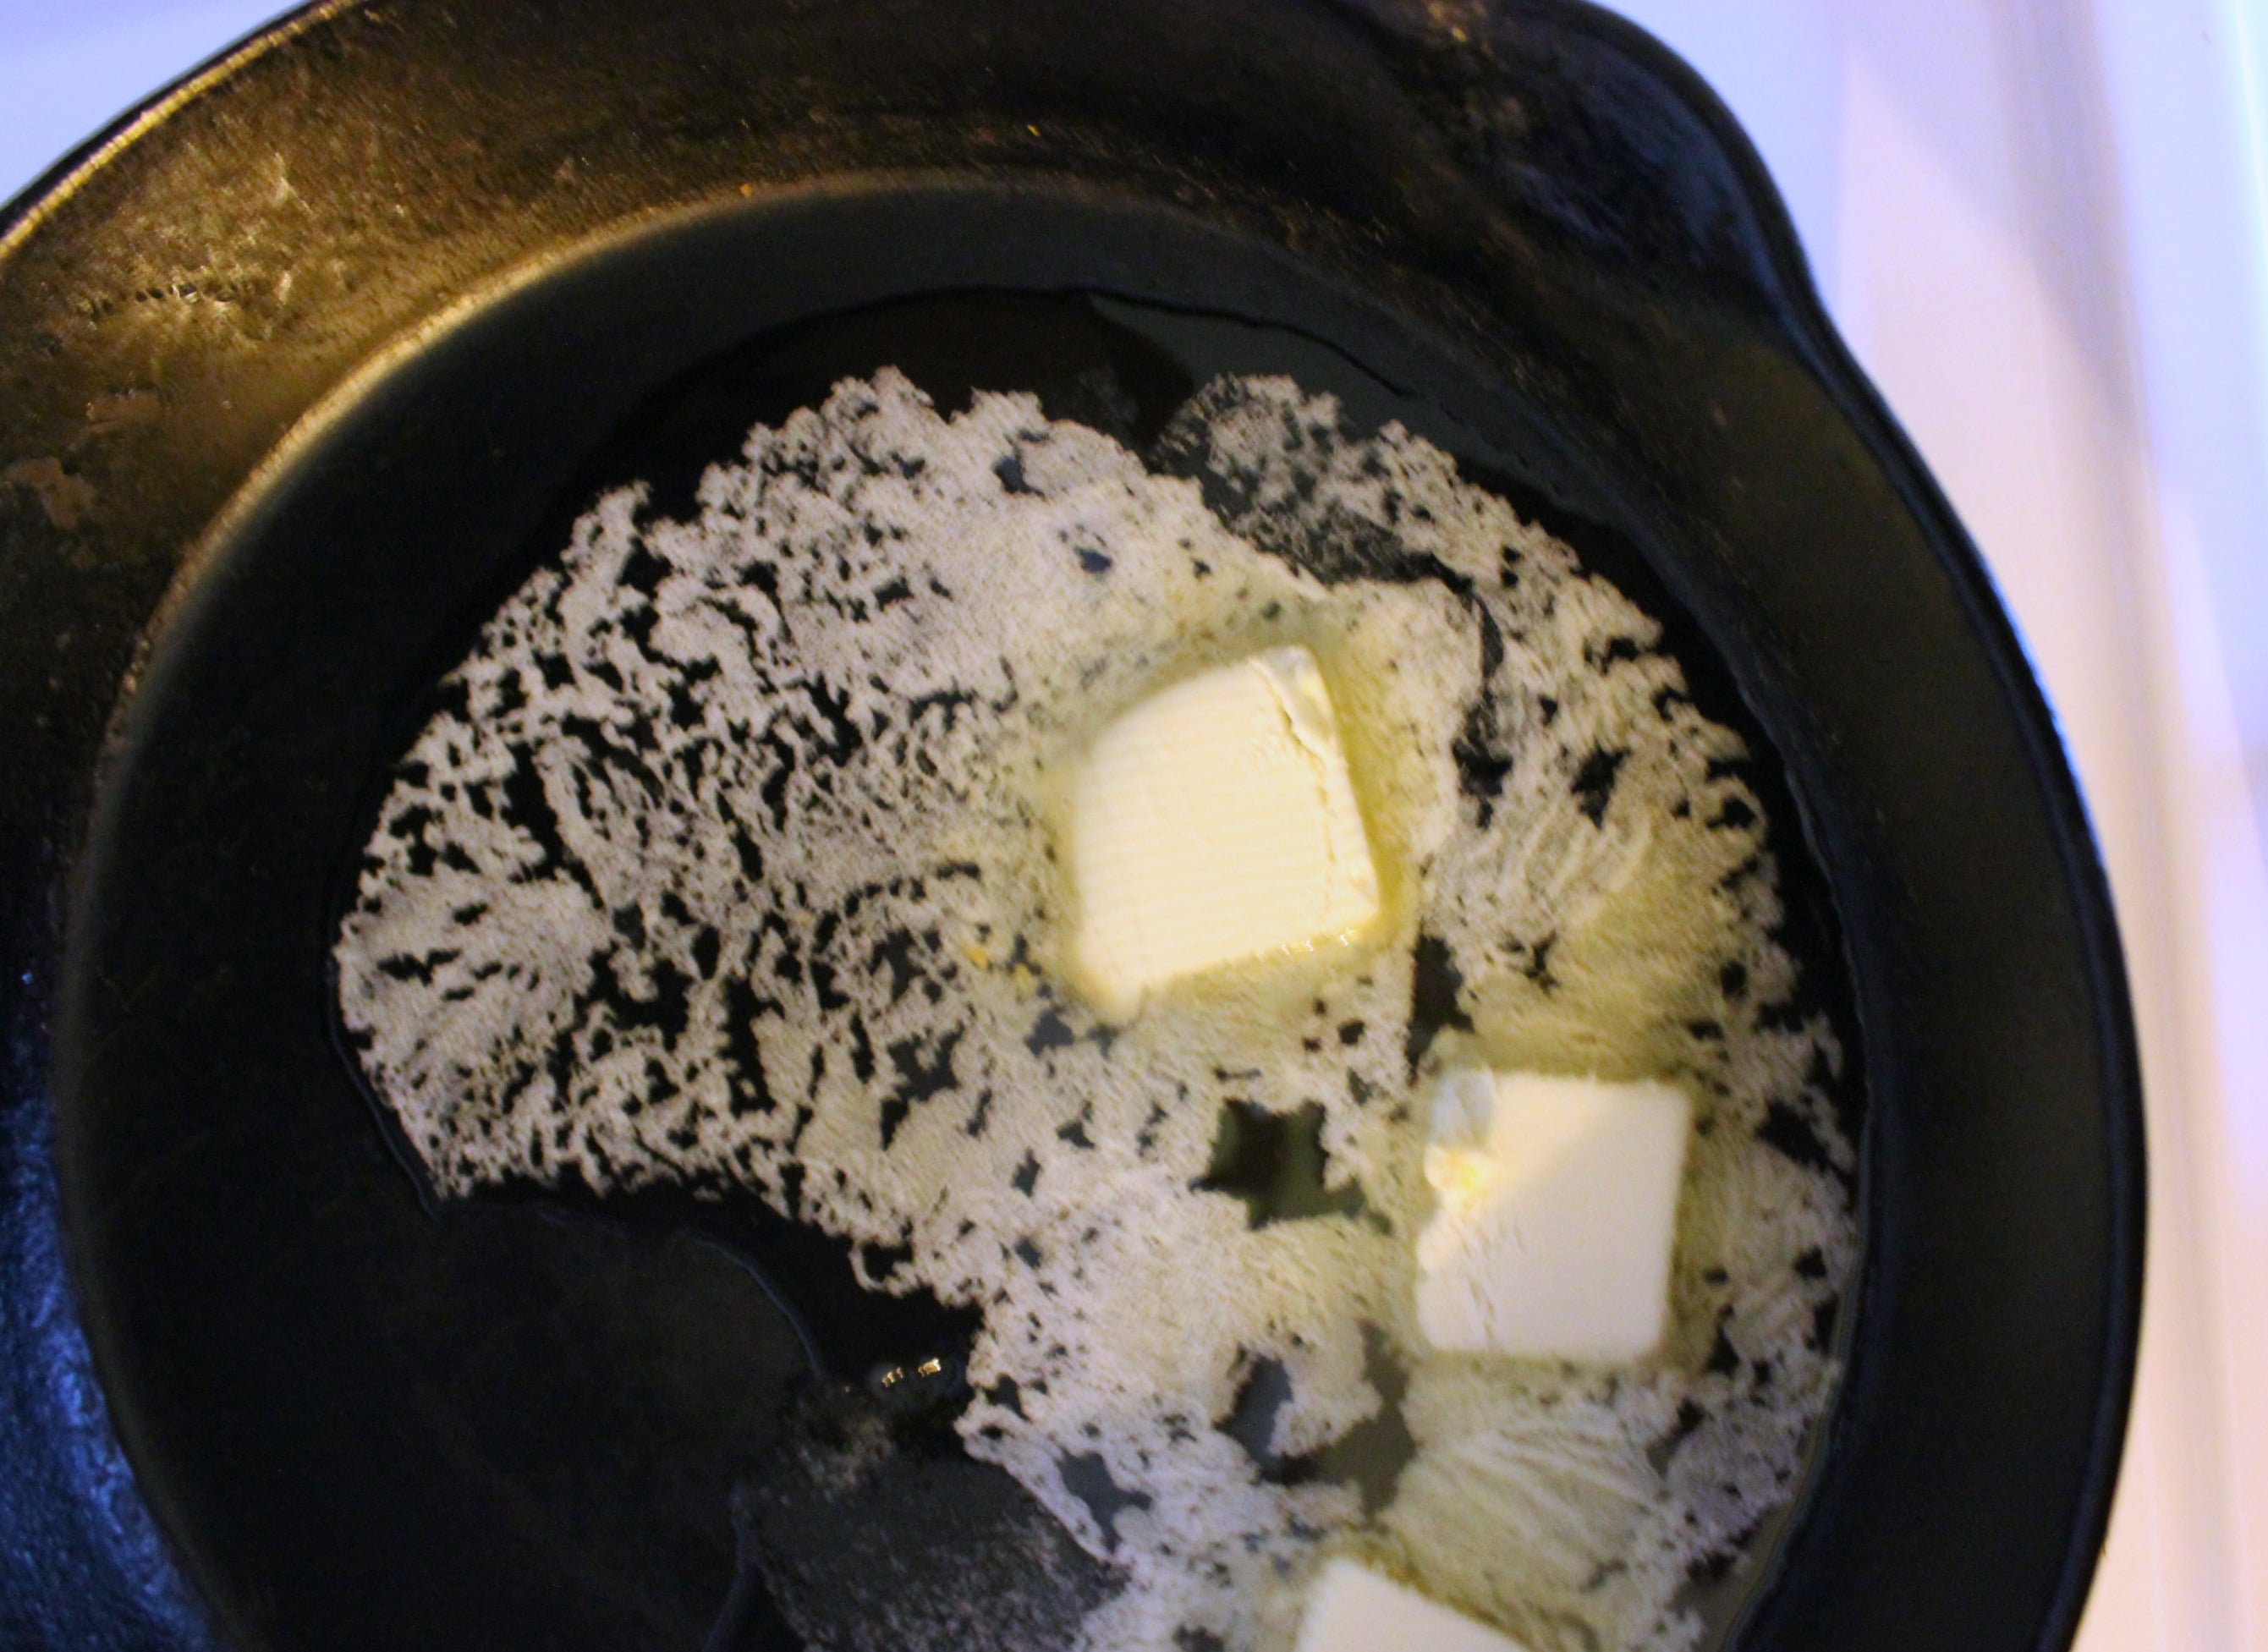 Melt 3 tablespoons of butter or coconut oil over medium heat.